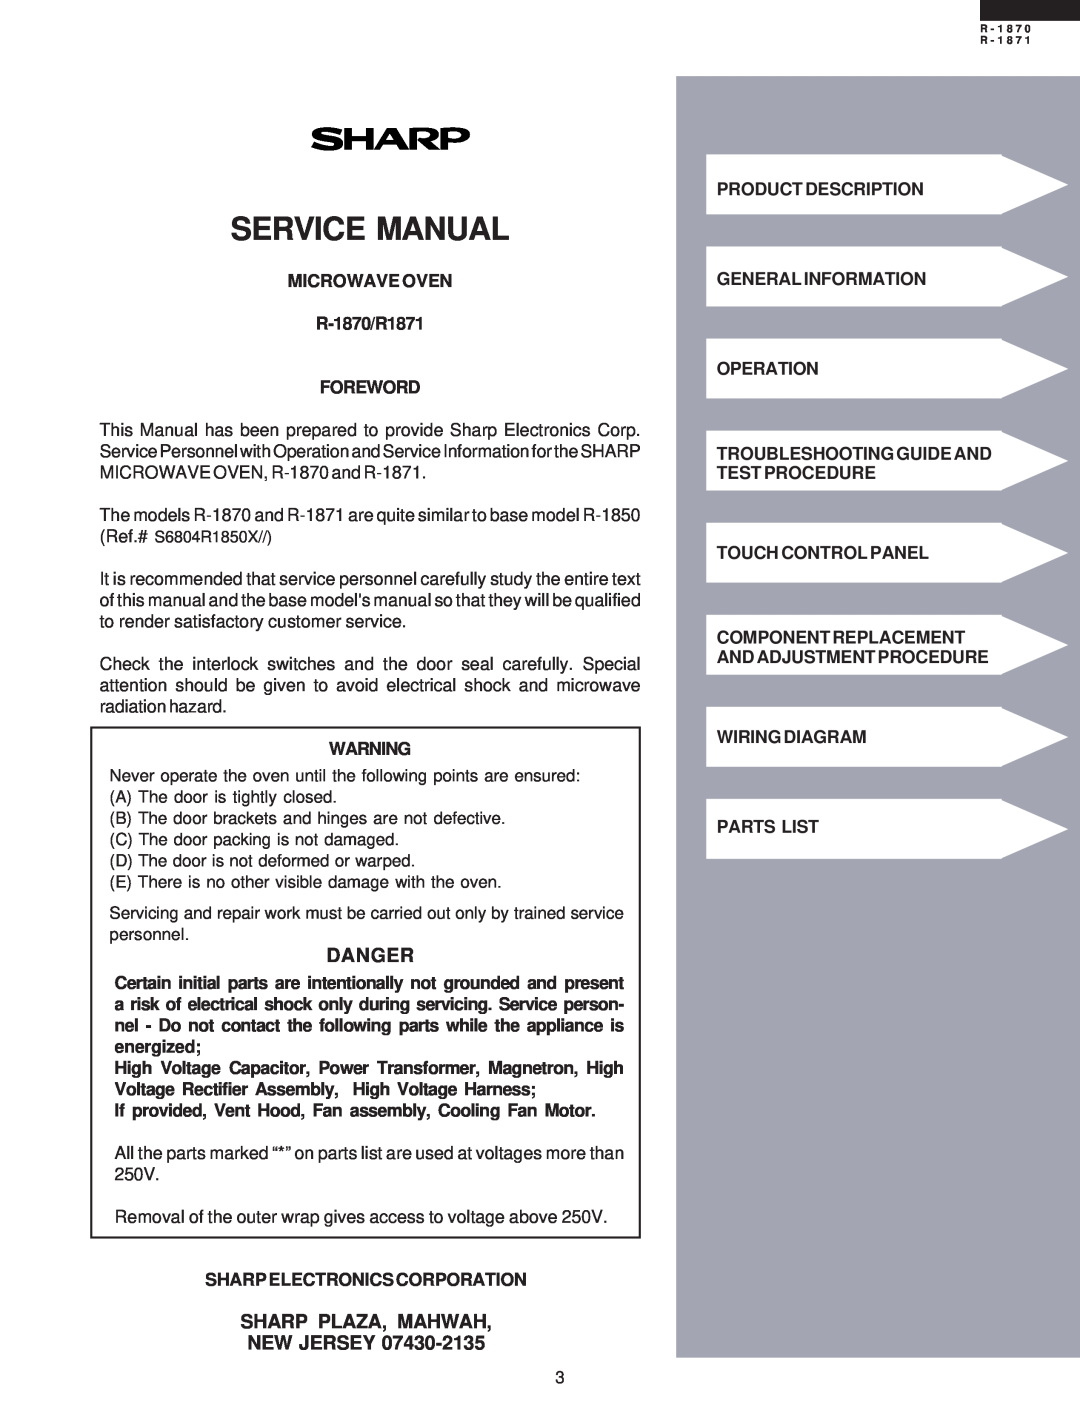 Sharp service manual Danger, Sharp Plaza, Mahwah New Jersey, Service Manual, MICROWAVE OVEN R-1870/R1871 FOREWORD 